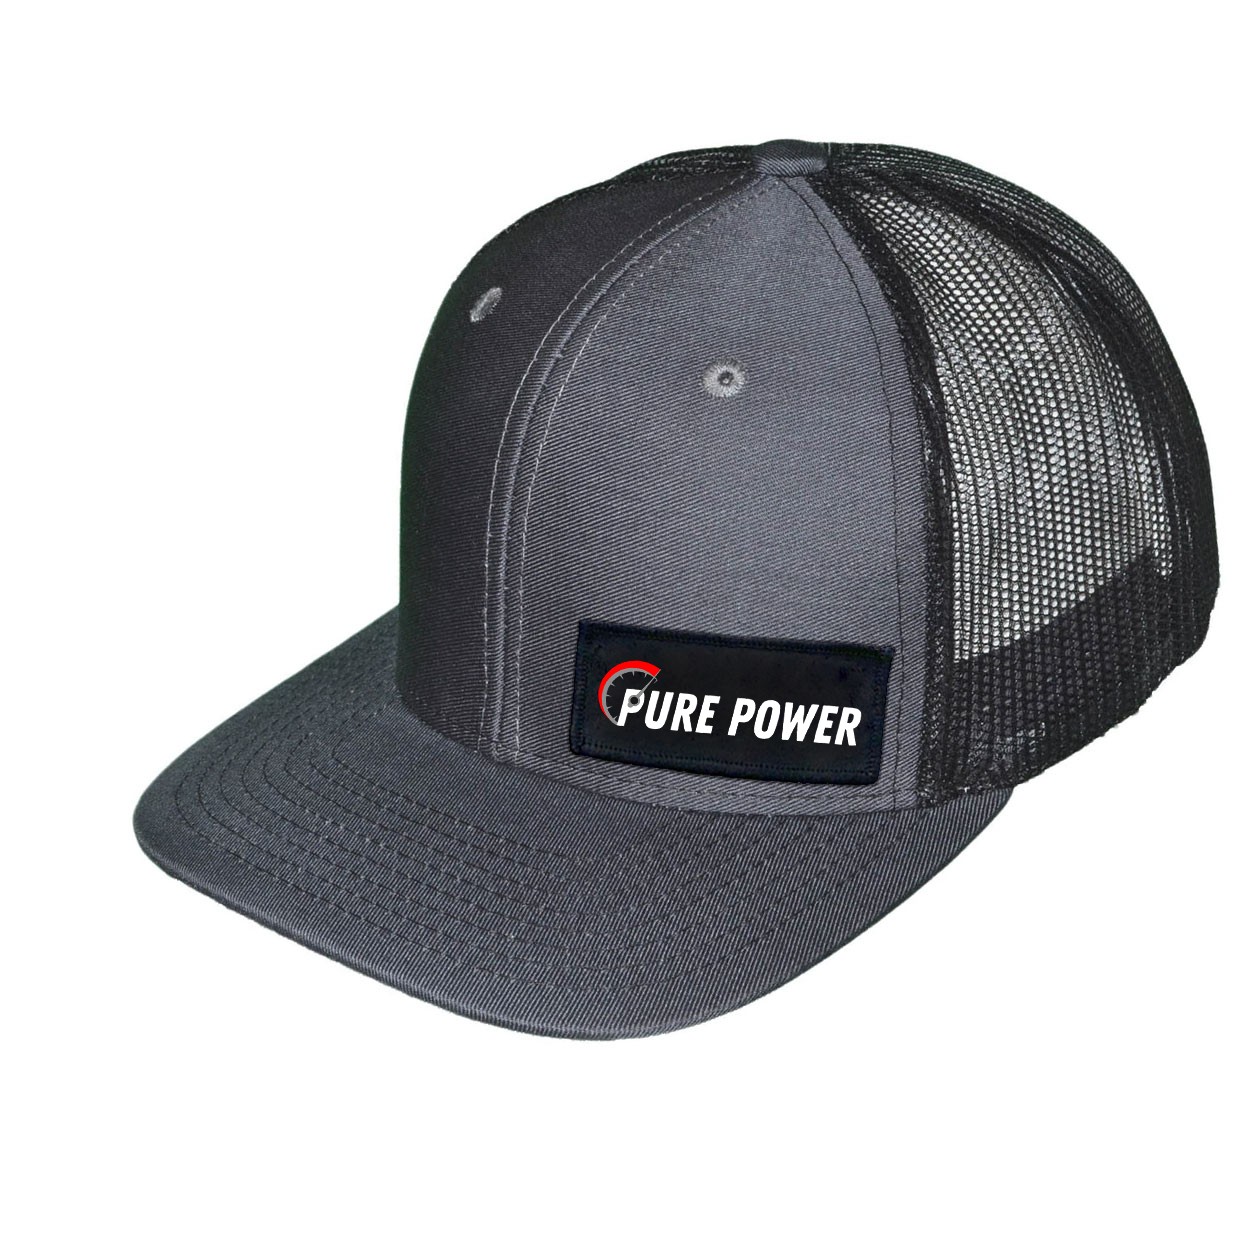 Ride Pure Power Logo Night Out Woven Patch Snapback Trucker Hat Gray/Black (White Logo)